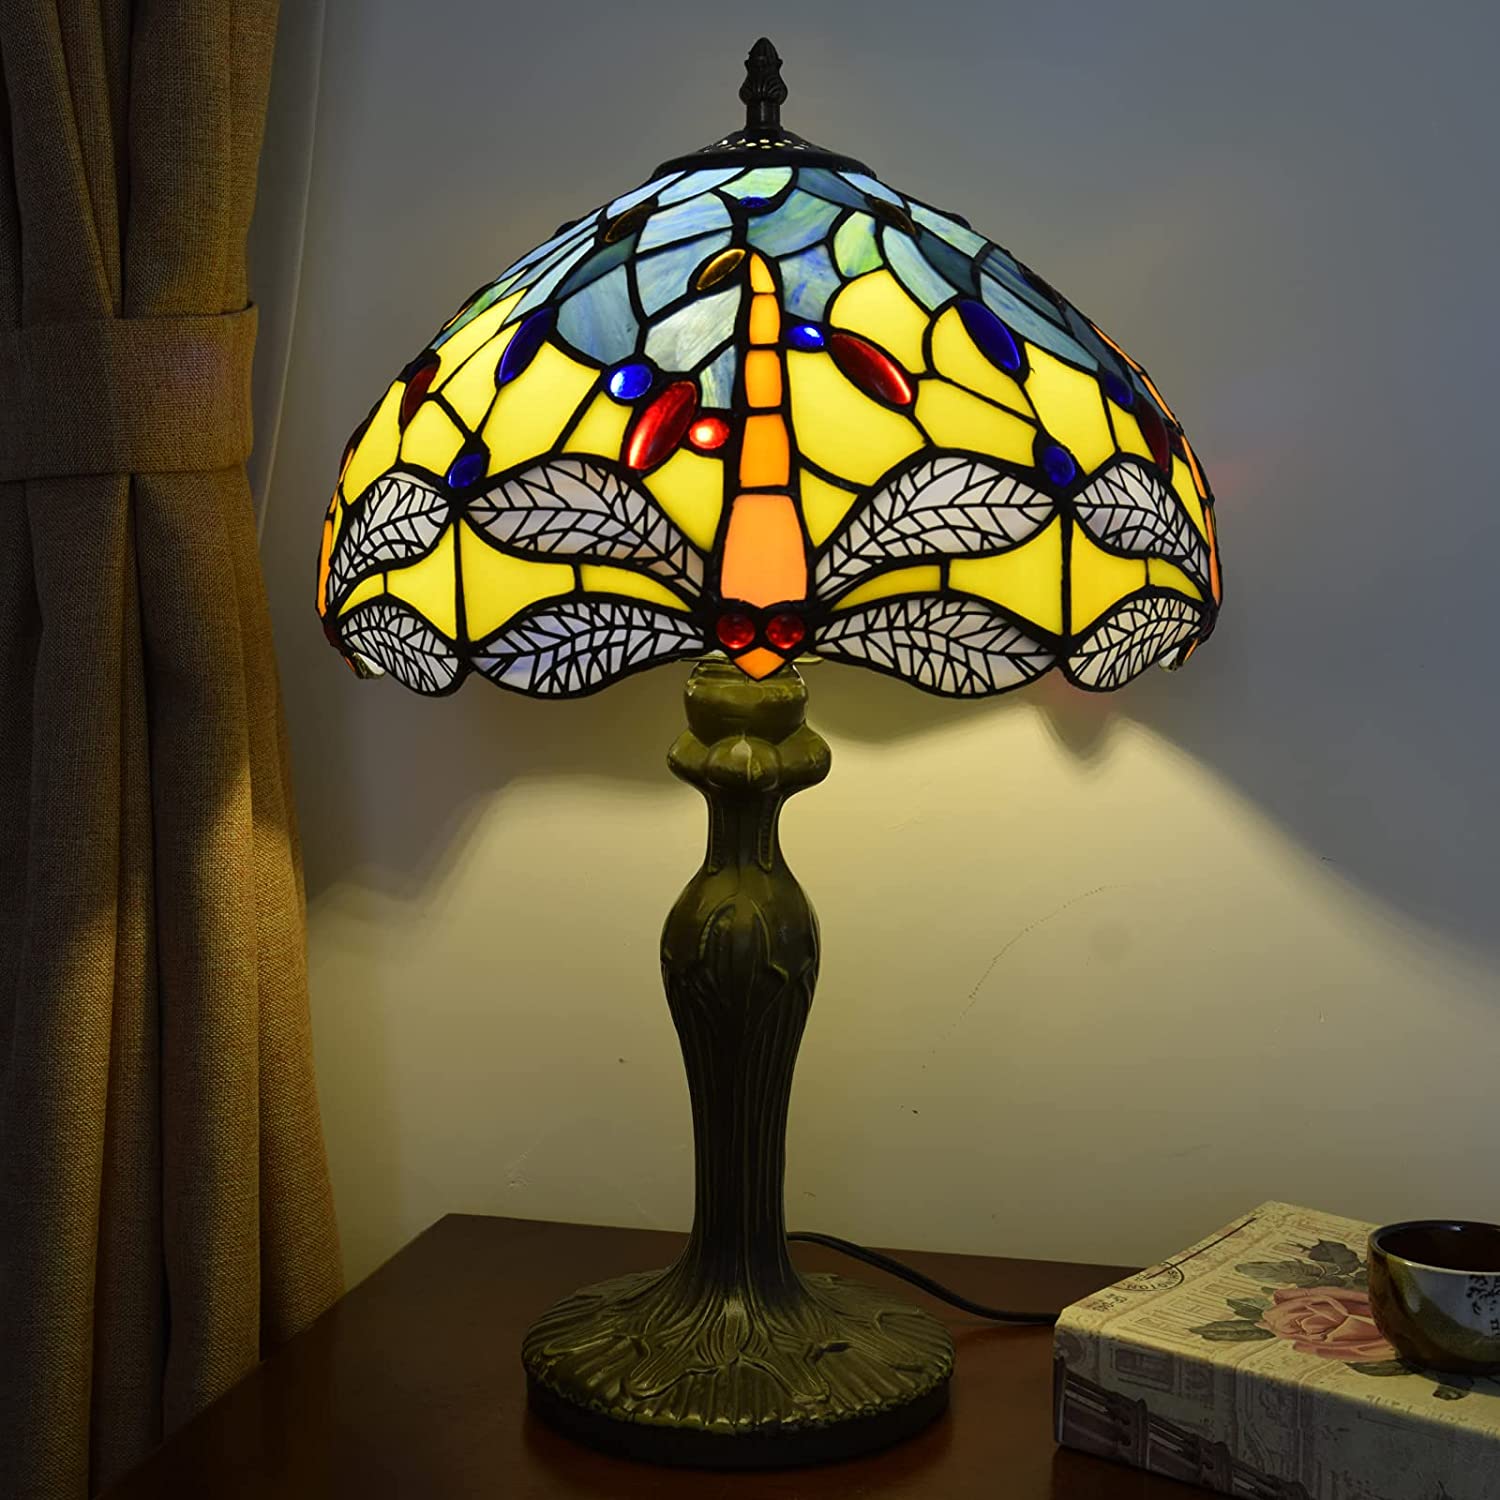 SHADY  Lamp Stained Glass Lamp Yellow Blue Dragonfly Bedroom Table Lamp Reading Desk Light for Bedside Living Room Office Dormitory Dining Room Decorate  12x12x18 Include Light Bul